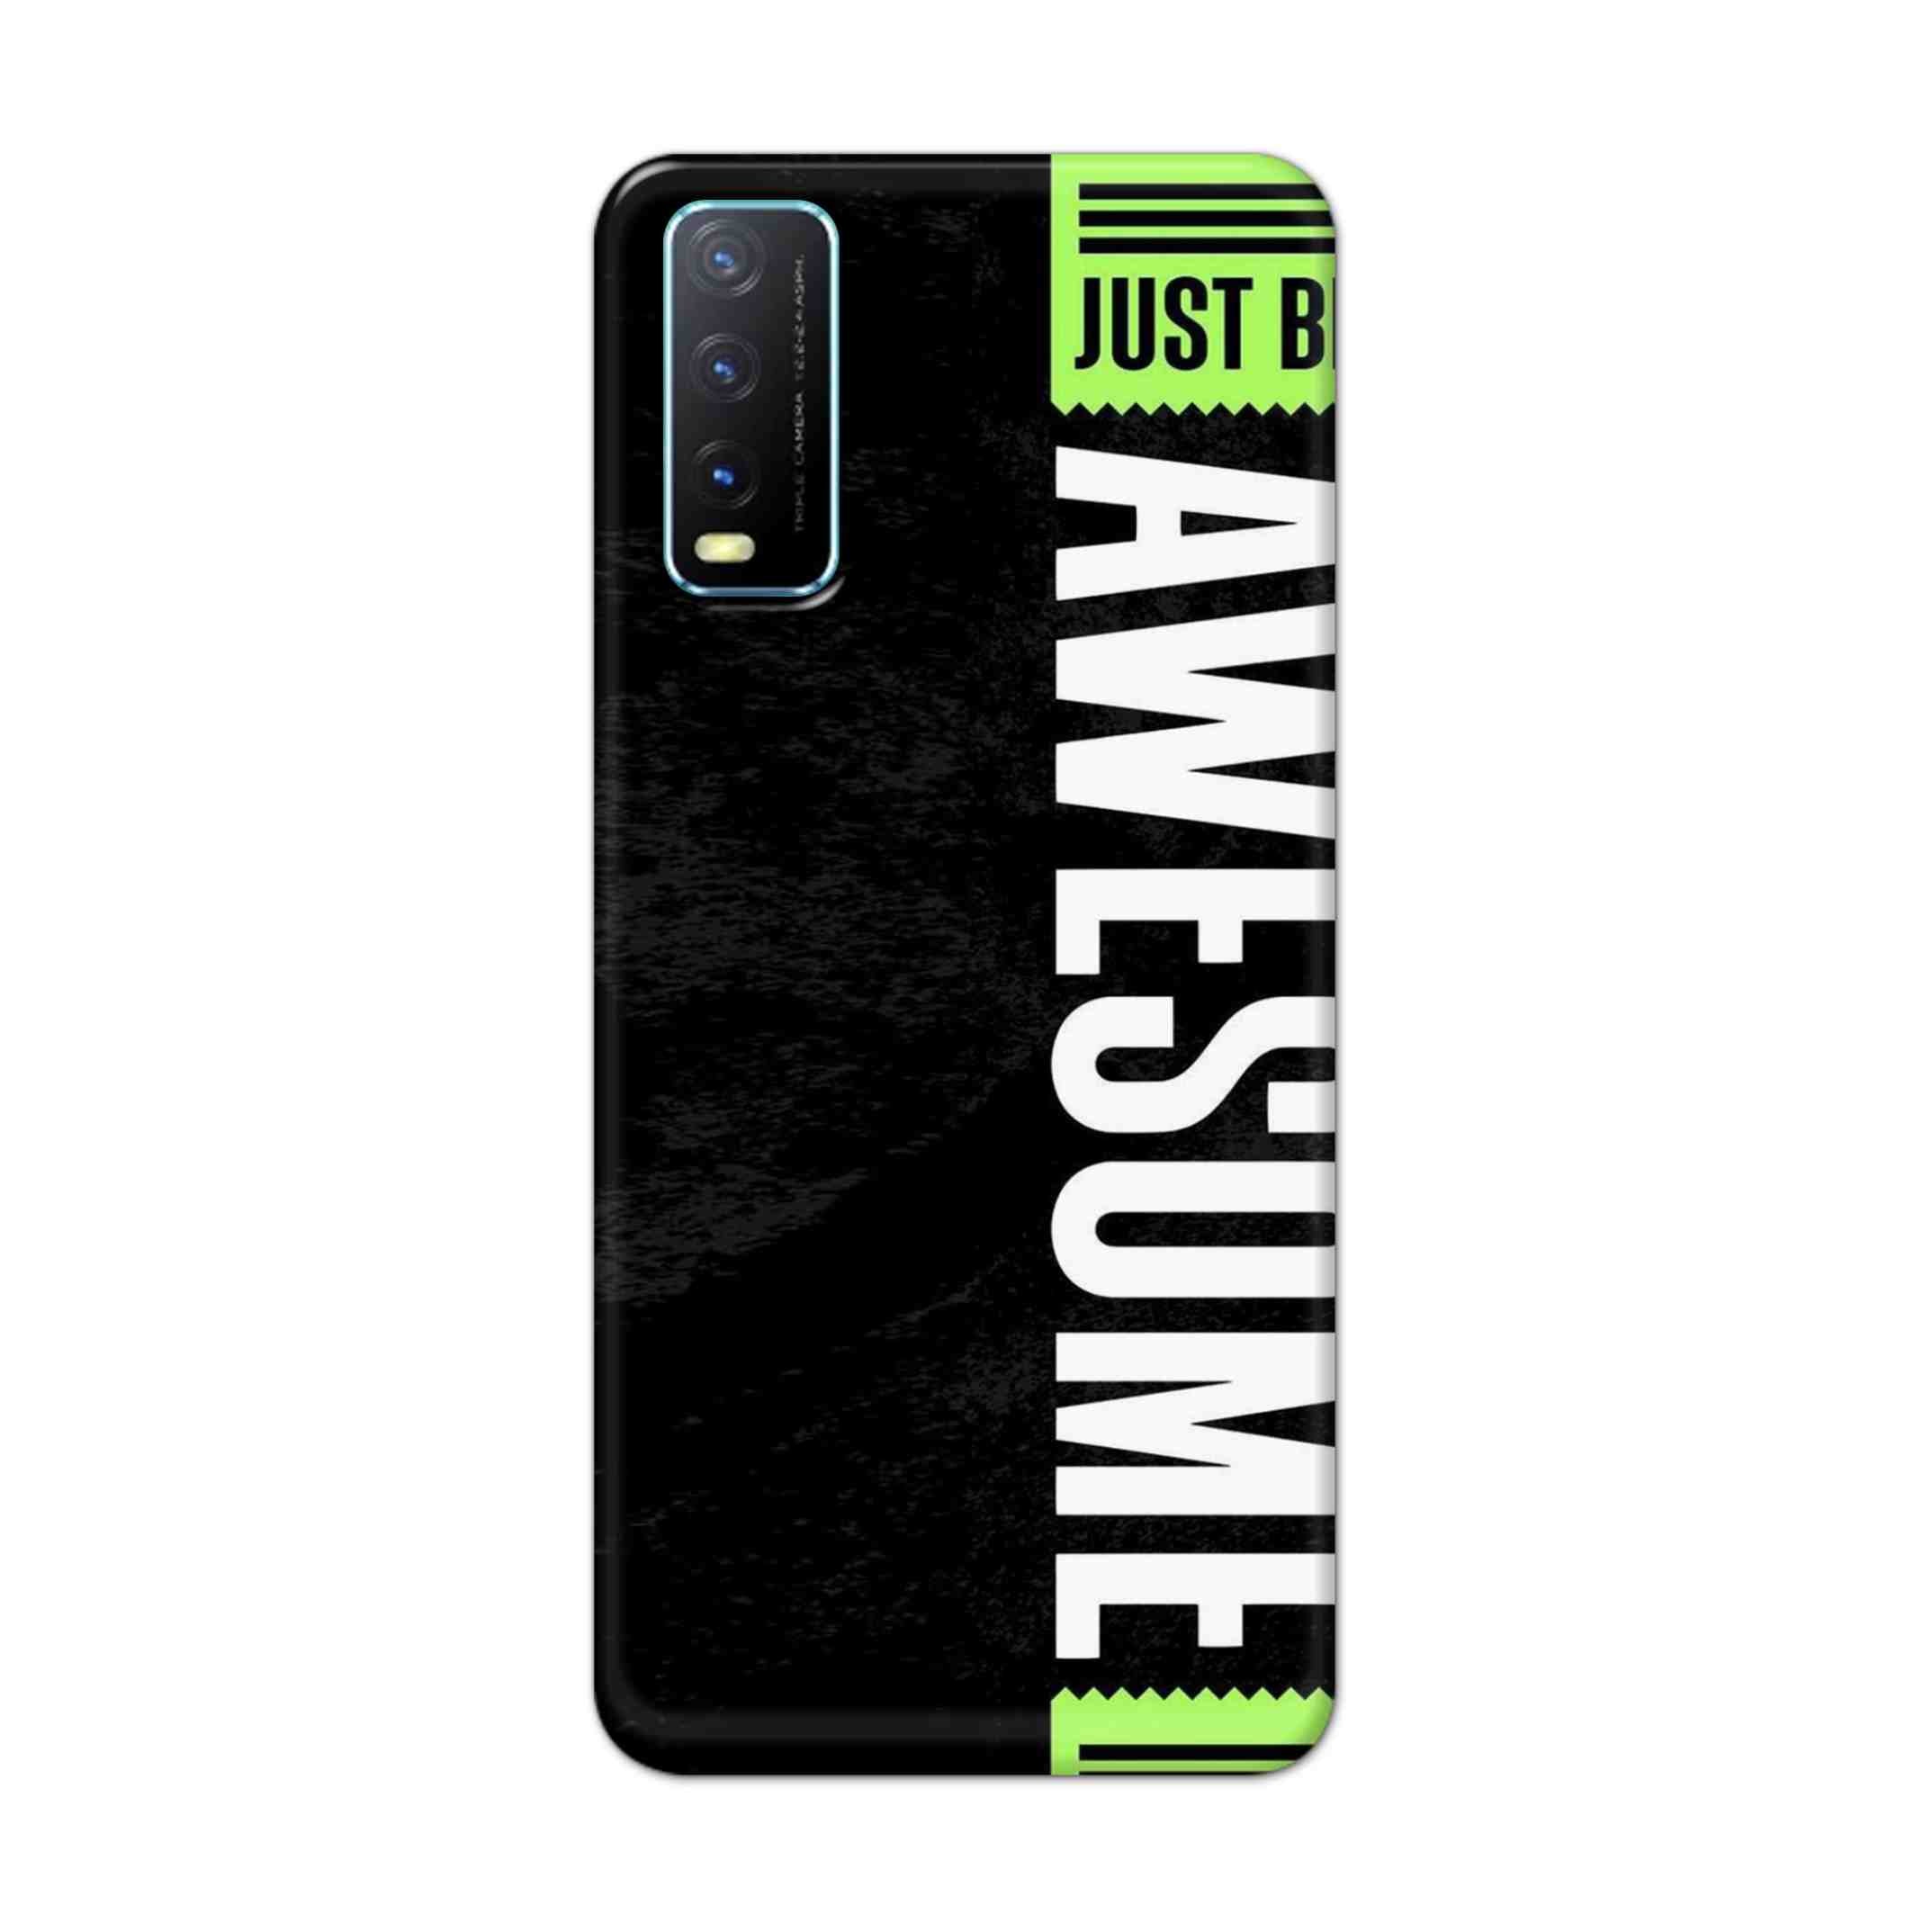 Buy Awesome Street Hard Back Mobile Phone Case Cover For Vivo Y20 Online